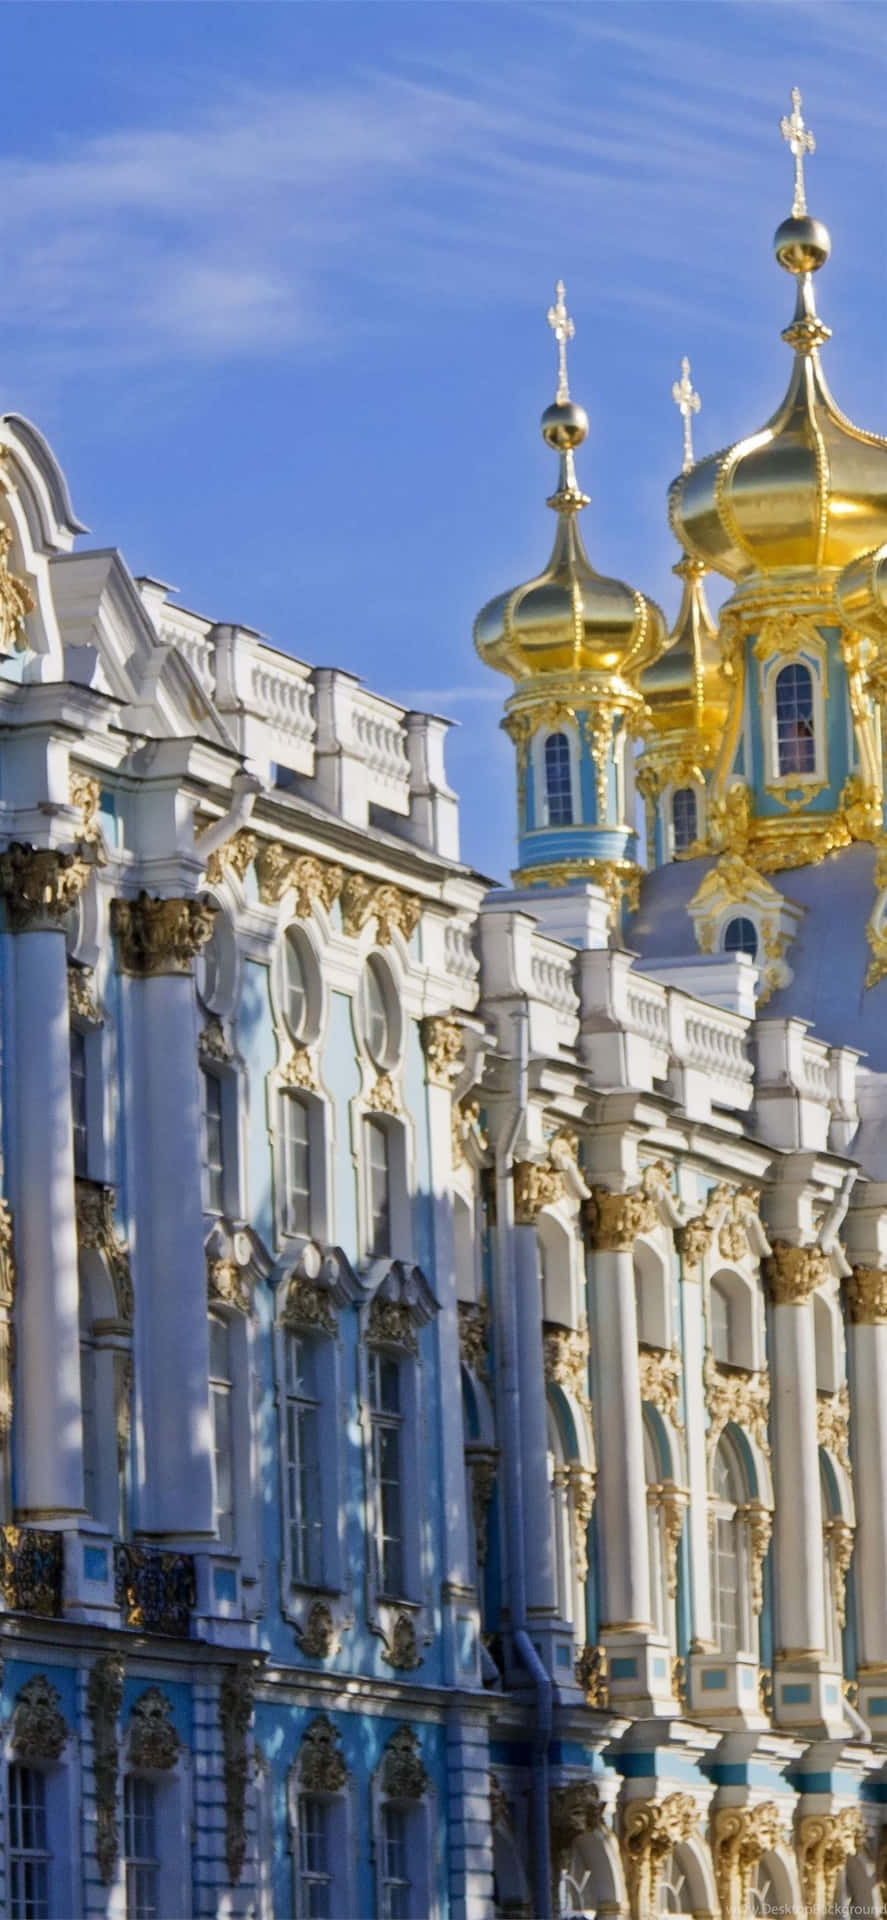 Impeccable Architectural Details of Catherine Palace Wallpaper